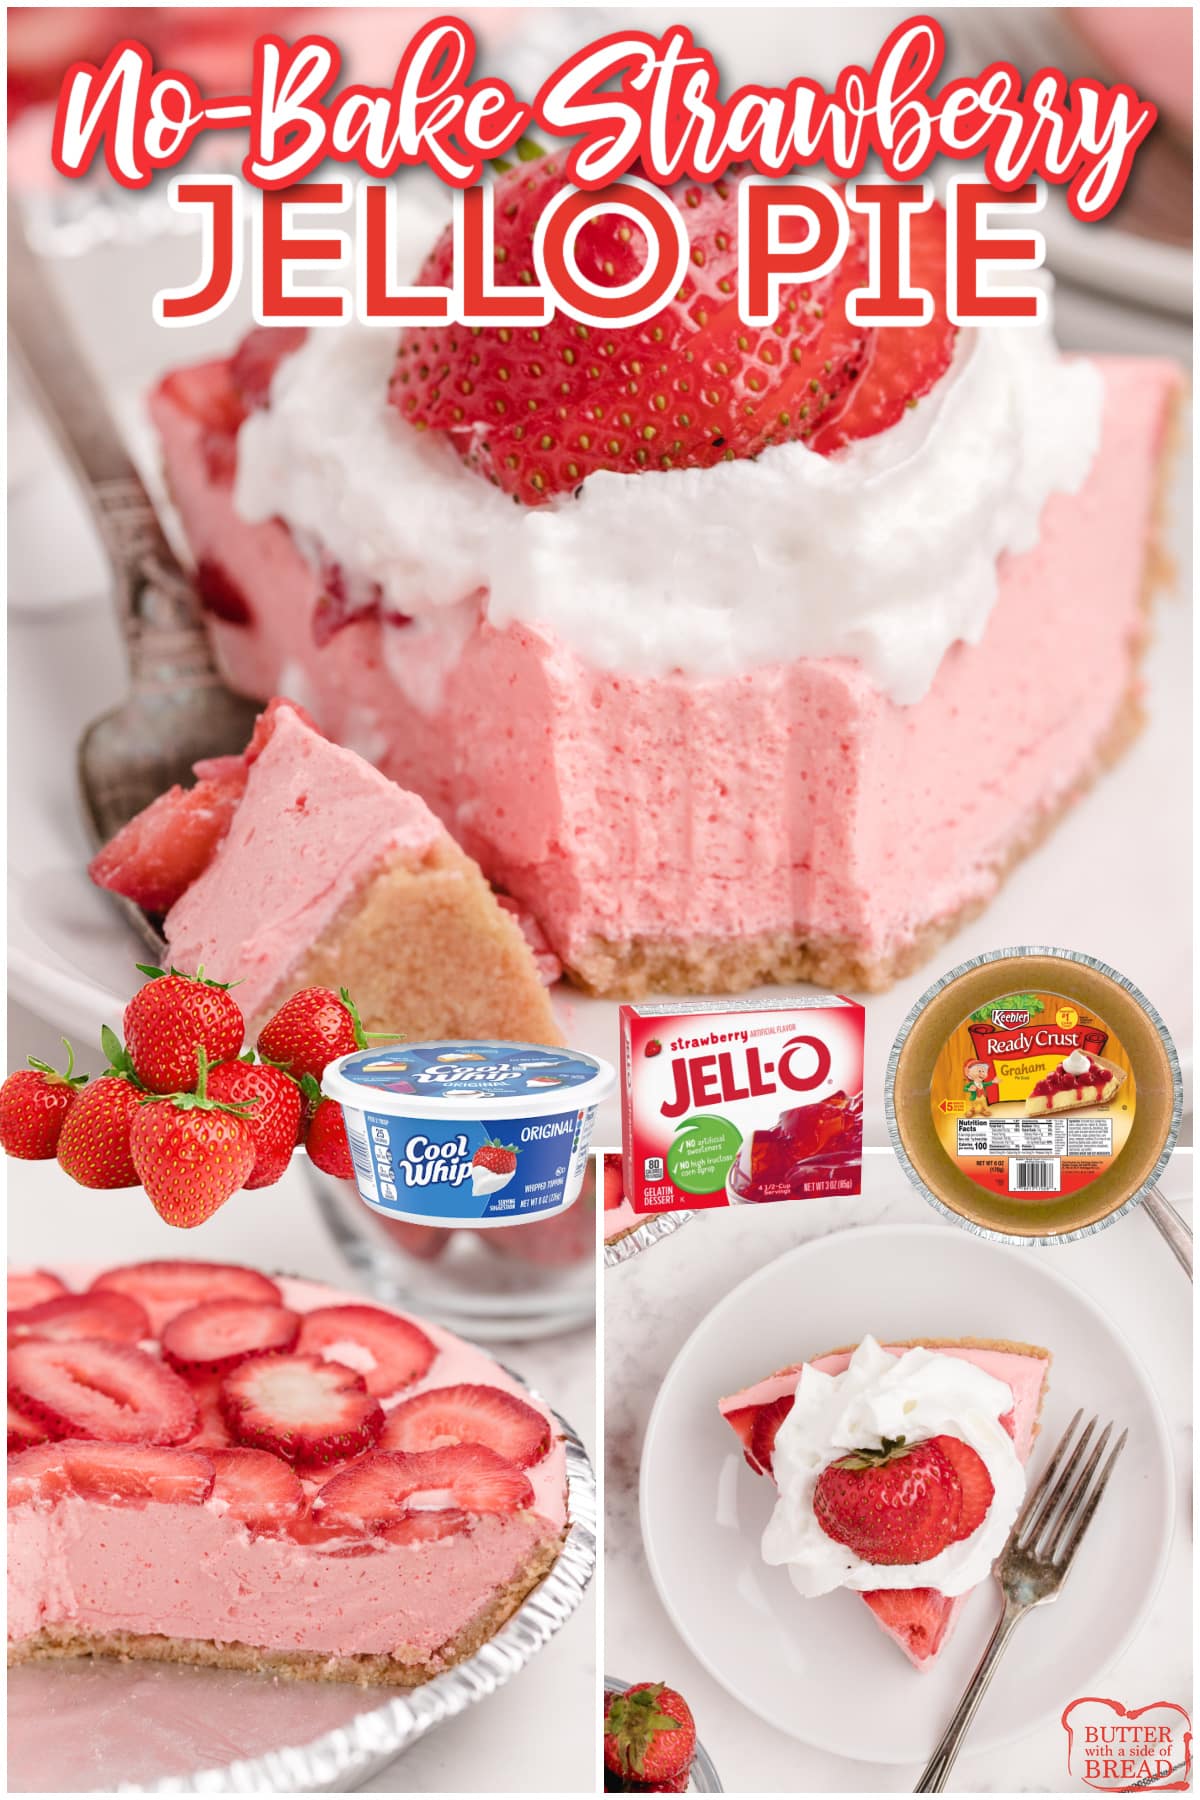 No-Bake Strawberry Jello Pie is an easy no-bake dessert made with only 5 ingredients. This refreshing strawberry dessert recipe couldn't be any easier to make! 